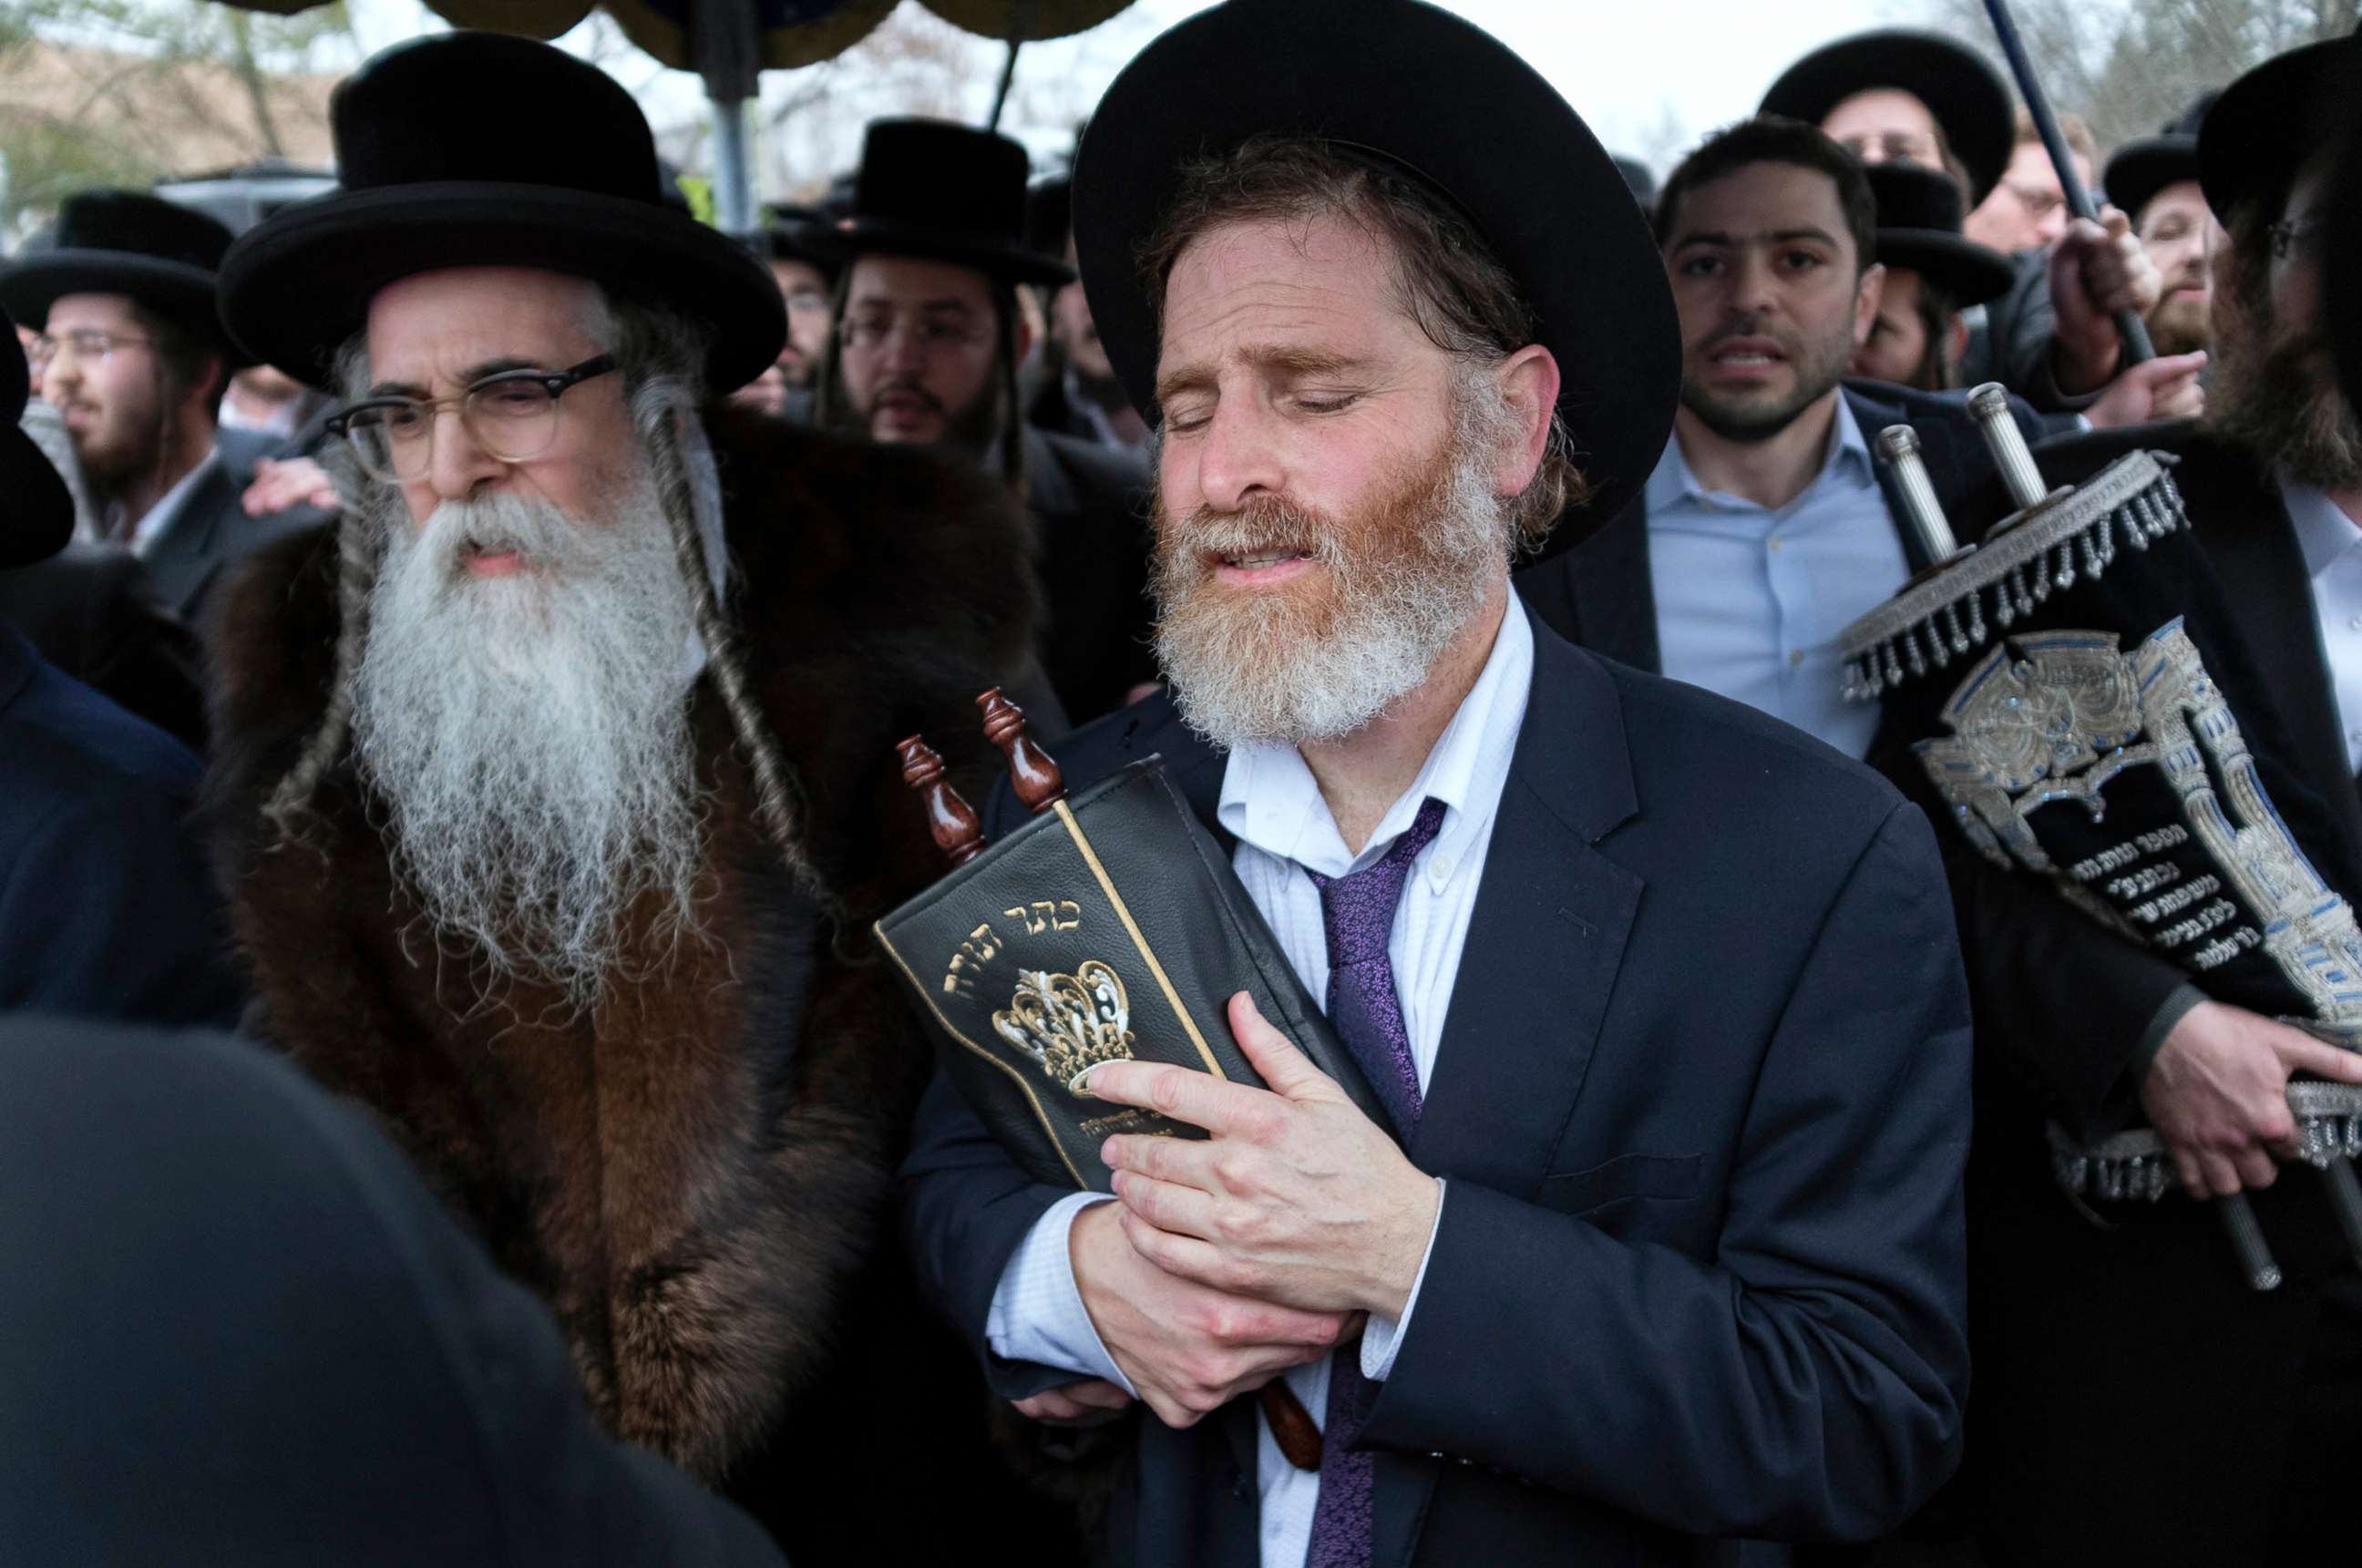 PHOTO: Community members, including Rabbi Chaim Rottenberg, left, celebrate the arrival of a new Torah near the rabbi's residence in Monsey, N.Y., Dec. 29, 2019. 